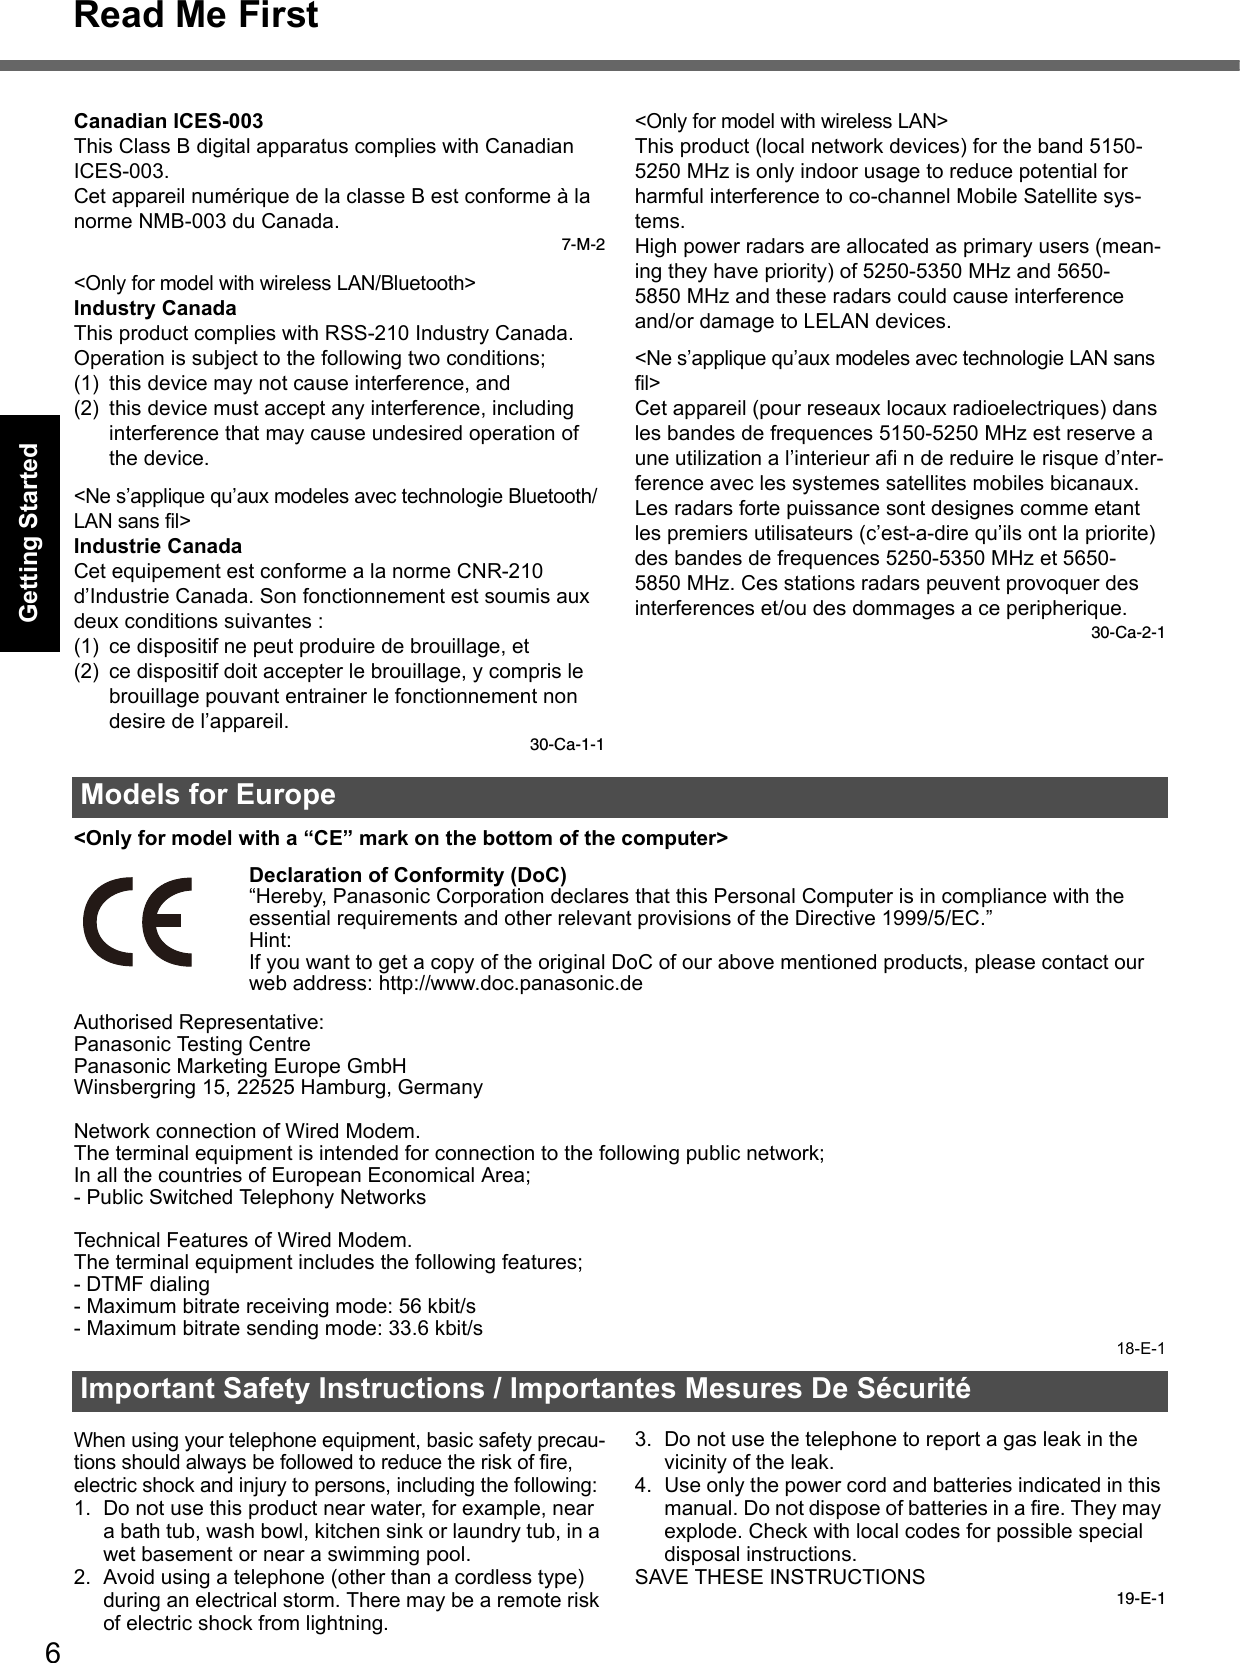 6Read Me FirstGetting StartedUseful InformationTroubleshootingAppendixCanadian ICES-003This Class B digital apparatus complies with Canadian ICES-003.Cet appareil numérique de la classe B est conforme à la norme NMB-003 du Canada.7-M-2&lt;Only for model with wireless LAN/Bluetooth&gt;Industry CanadaThis product complies with RSS-210 Industry Canada.Operation is subject to the following two conditions;(1) this device may not cause interference, and(2) this device must accept any interference, including interference that may cause undesired operation of the device.&lt;Ne s’applique qu’aux modeles avec technologie Bluetooth/LAN sans fil&gt;Industrie CanadaCet equipement est conforme a la norme CNR-210 d’Industrie Canada. Son fonctionnement est soumis aux deux conditions suivantes :(1) ce dispositif ne peut produire de brouillage, et(2) ce dispositif doit accepter le brouillage, y compris le brouillage pouvant entrainer le fonctionnement non desire de l’appareil.30-Ca-1-1&lt;Only for model with wireless LAN&gt;This product (local network devices) for the band 5150-5250 MHz is only indoor usage to reduce potential for harmful interference to co-channel Mobile Satellite sys-tems.High power radars are allocated as primary users (mean-ing they have priority) of 5250-5350 MHz and 5650-5850 MHz and these radars could cause interference and/or damage to LELAN devices.&lt;Ne s’applique qu’aux modeles avec technologie LAN sans fil&gt;Cet appareil (pour reseaux locaux radioelectriques) dans les bandes de frequences 5150-5250 MHz est reserve a une utilization a l’interieur afi n de reduire le risque d’nter-ference avec les systemes satellites mobiles bicanaux.Les radars forte puissance sont designes comme etant les premiers utilisateurs (c’est-a-dire qu’ils ont la priorite) des bandes de frequences 5250-5350 MHz et 5650-5850 MHz. Ces stations radars peuvent provoquer des interferences et/ou des dommages a ce peripherique.30-Ca-2-1&lt;Only for model with a “CE” mark on the bottom of the computer&gt;Declaration of Conformity (DoC)“Hereby, Panasonic Corporation declares that this Personal Computer is in compliance with the essential requirements and other relevant provisions of the Directive 1999/5/EC.”Hint:If you want to get a copy of the original DoC of our above mentioned products, please contact our web address: http://www.doc.panasonic.deAuthorised Representative:Panasonic Testing CentrePanasonic Marketing Europe GmbHWinsbergring 15, 22525 Hamburg, GermanyNetwork connection of Wired Modem.The terminal equipment is intended for connection to the following public network;In all the countries of European Economical Area;- Public Switched Telephony NetworksTechnical Features of Wired Modem.The terminal equipment includes the following features;- DTMF dialing- Maximum bitrate receiving mode: 56 kbit/s- Maximum bitrate sending mode: 33.6 kbit/s18-E-1When using your telephone equipment, basic safety precau-tions should always be followed to reduce the risk of fire, electric shock and injury to persons, including the following: 1. Do not use this product near water, for example, near a bath tub, wash bowl, kitchen sink or laundry tub, in a wet basement or near a swimming pool.2. Avoid using a telephone (other than a cordless type) during an electrical storm. There may be a remote risk of electric shock from lightning.3. Do not use the telephone to report a gas leak in the vicinity of the leak.4. Use only the power cord and batteries indicated in this manual. Do not dispose of batteries in a fire. They may explode. Check with local codes for possible special disposal instructions.SAVE THESE INSTRUCTIONS19-E-1Models for EuropeImportant Safety Instructions / Importantes Mesures De Sécurité